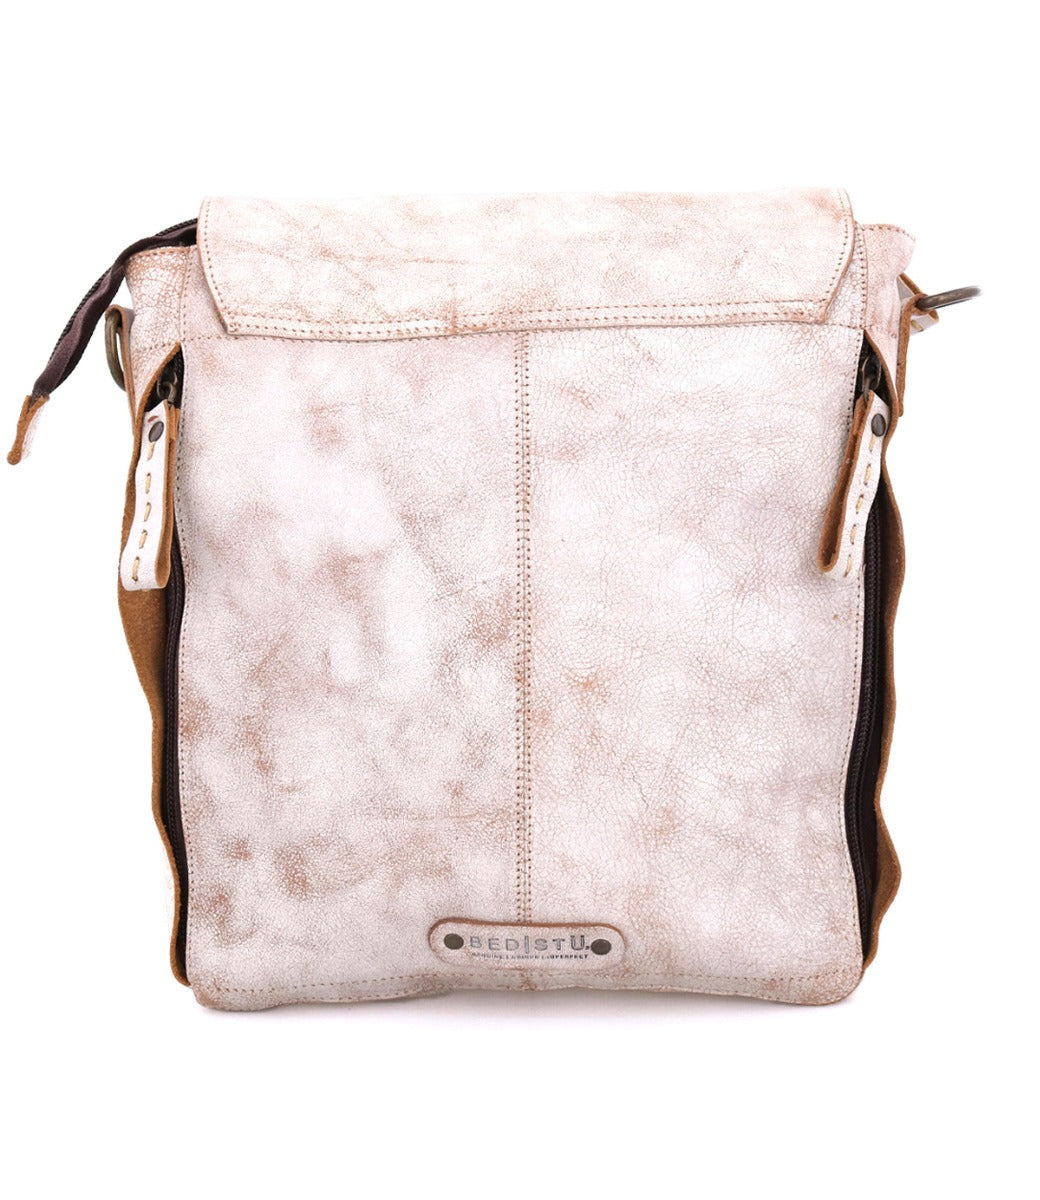 An Ainhoa by Bed Stu, a white leather crossbody bag with an adjustable strap.